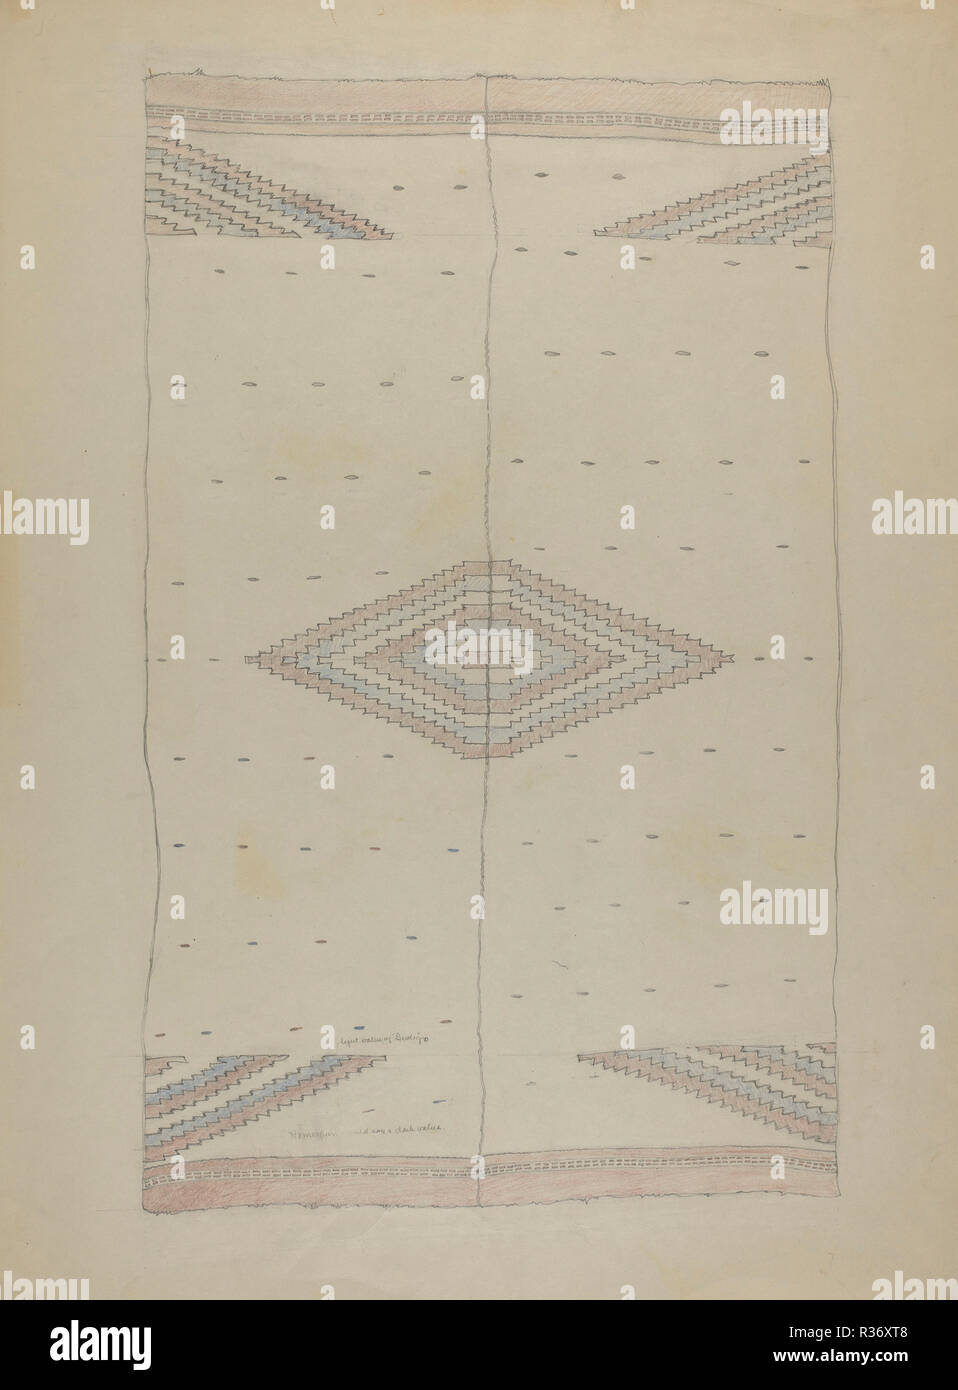 Textile. Dated: 1935/1942. Dimensions: overall: 66 x 50.8 cm (26 x 20 in.). Medium: graphite and colored pencil on paper. Museum: National Gallery of Art, Washington DC. Author: American 20th Century. Stock Photo